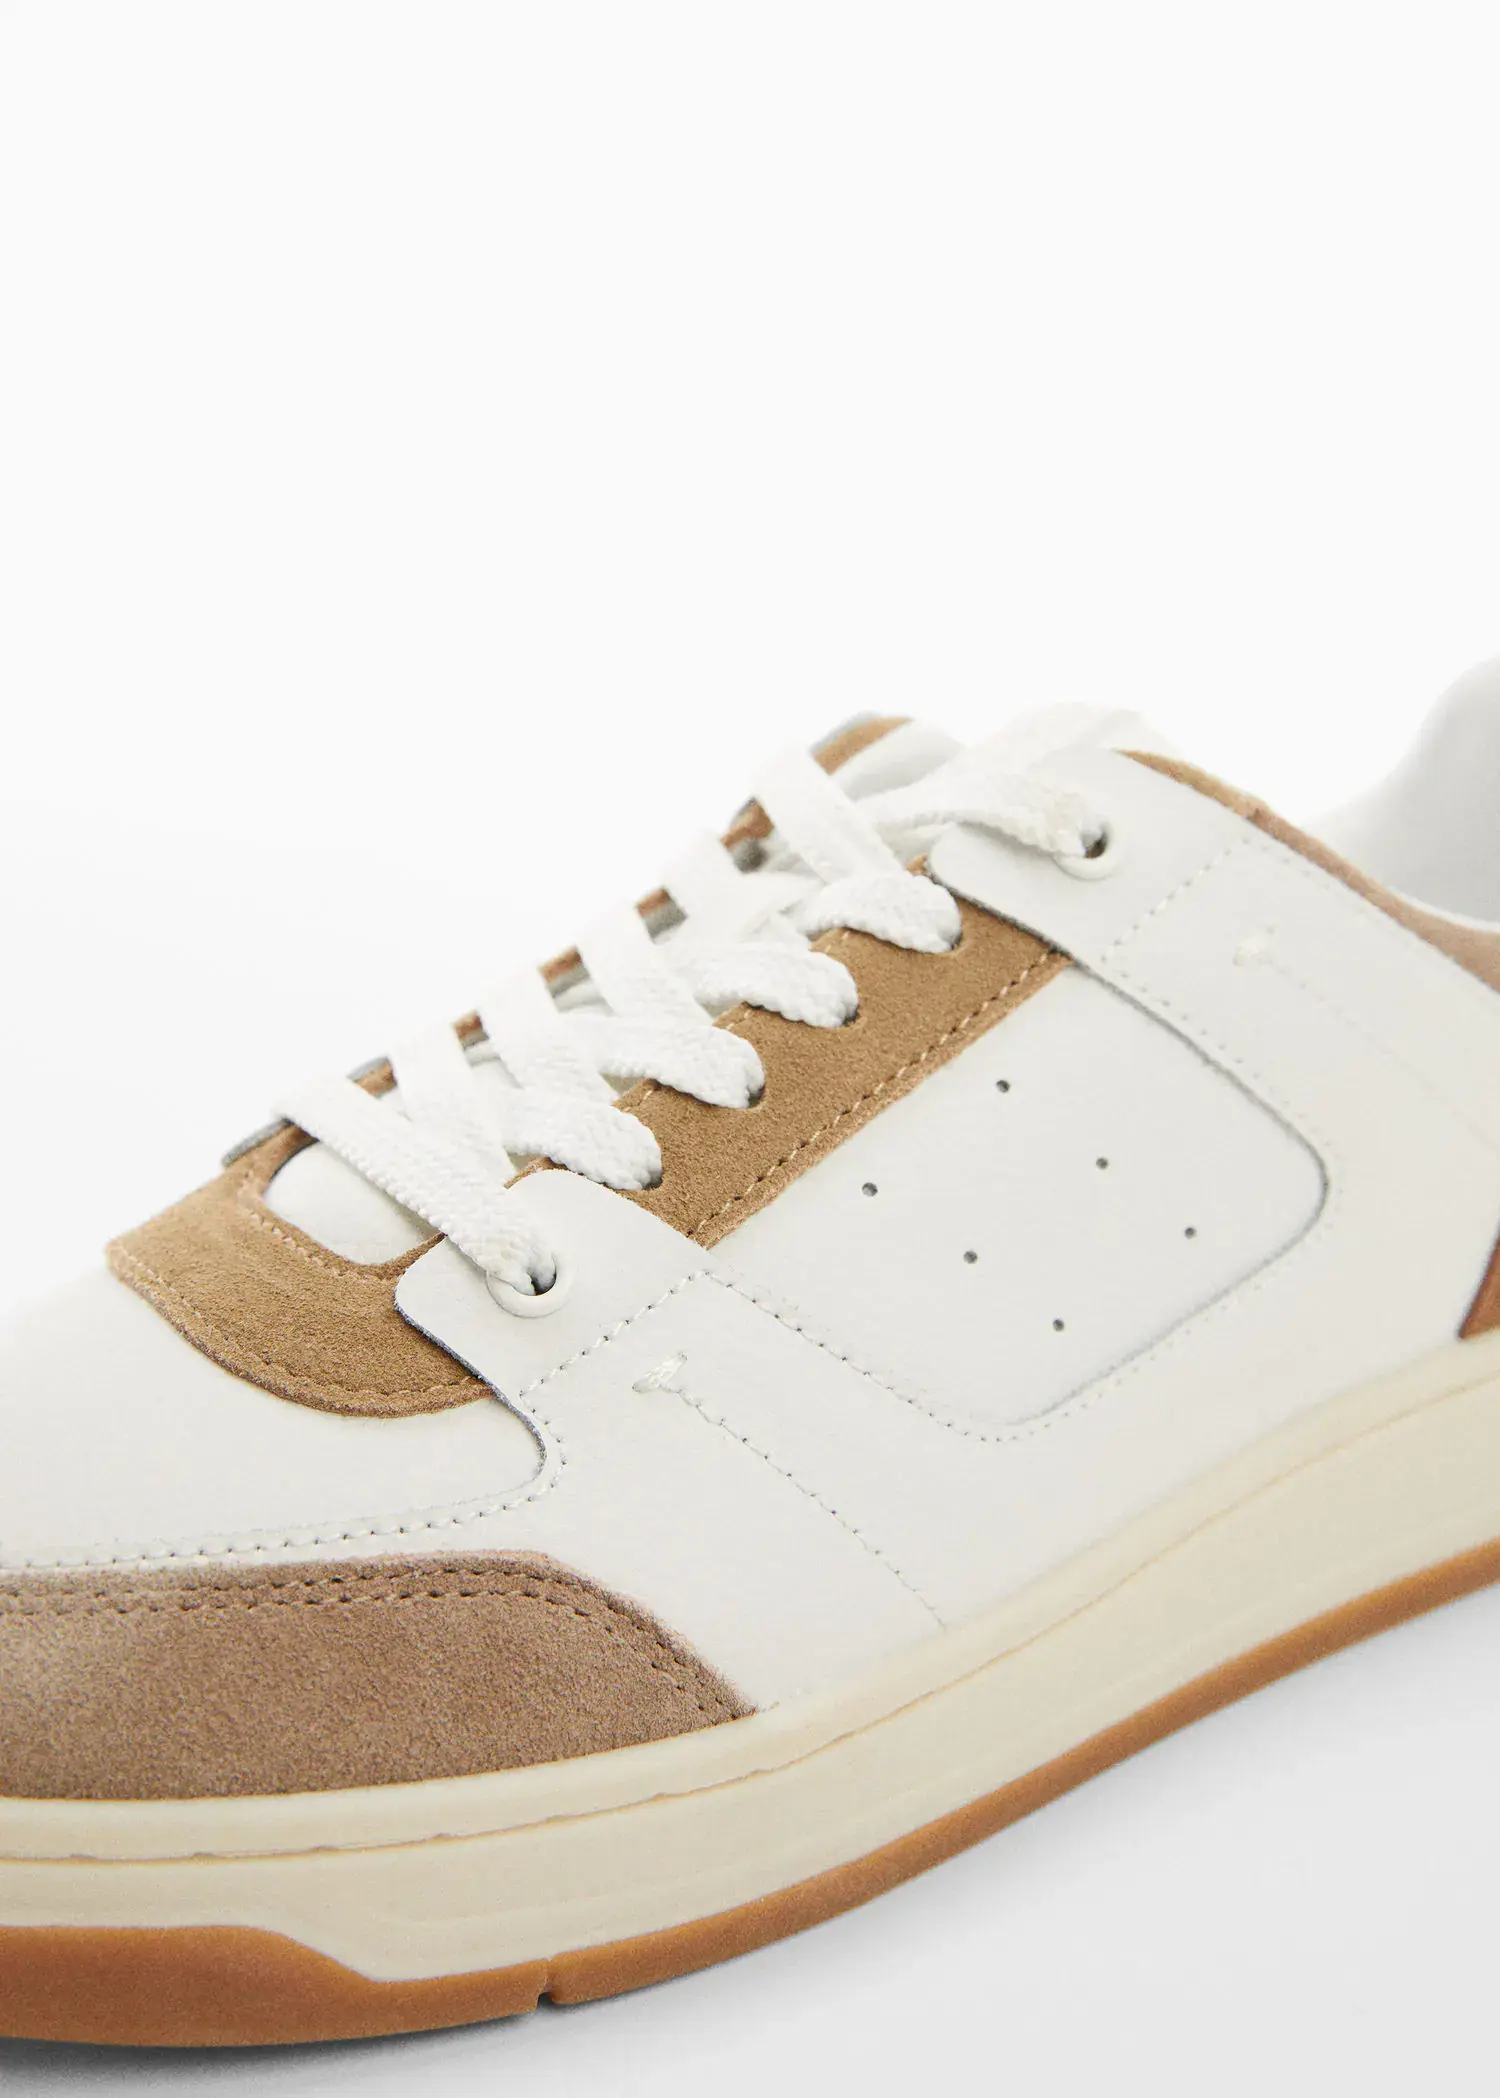 Mango Leather mixed sneakers. 3